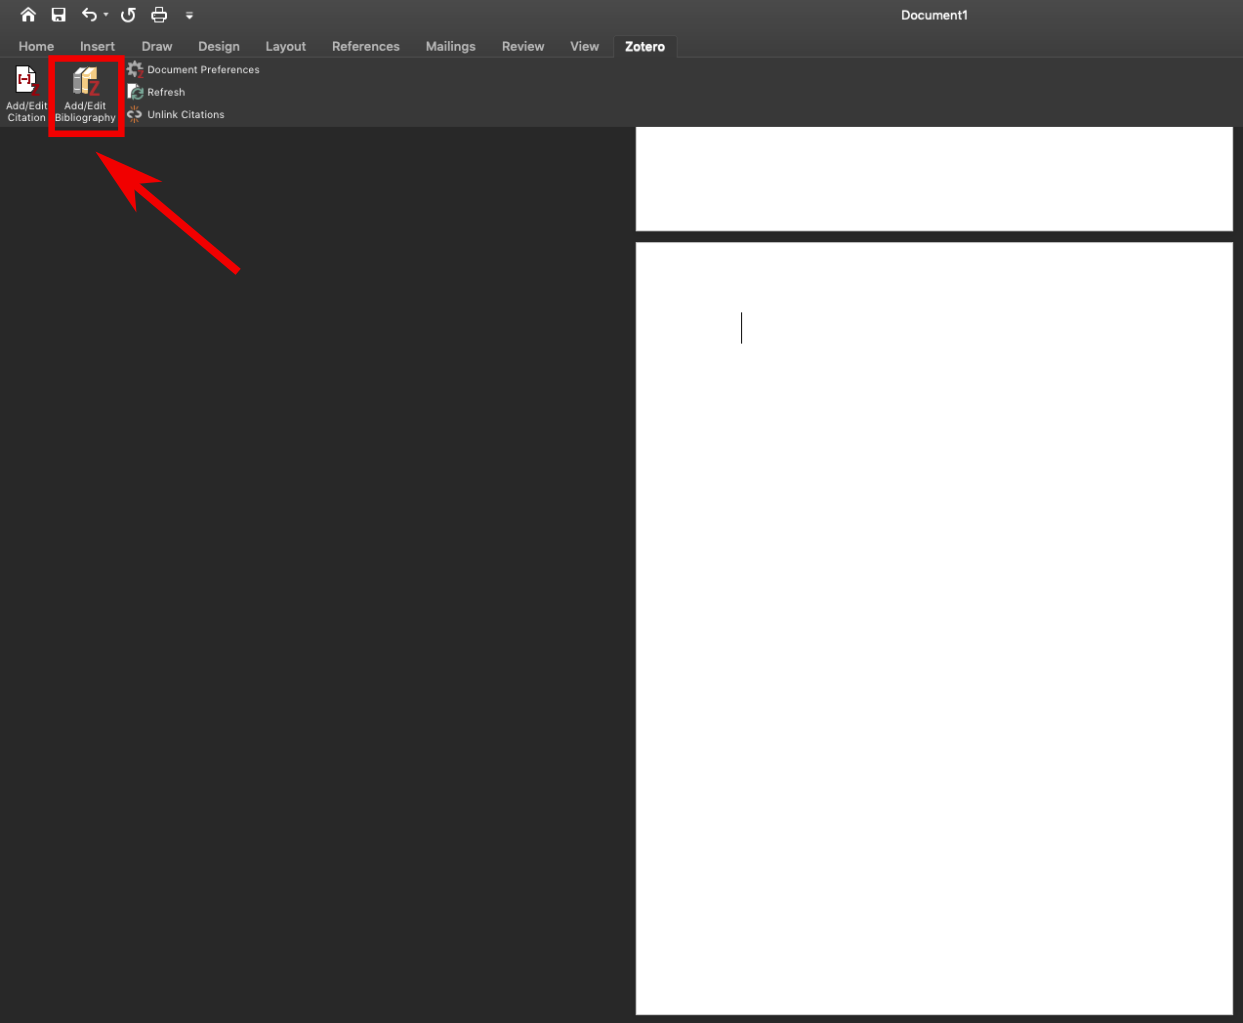 This image shows a blank page in a word document with the "Zotero" tab open in the menu at the top of the page. The menu option "Add/Edit Bibliography," which has an icon of two books with a red "Z" next to them,” is emphasized with a red box around it and a red arrow pointing to it.